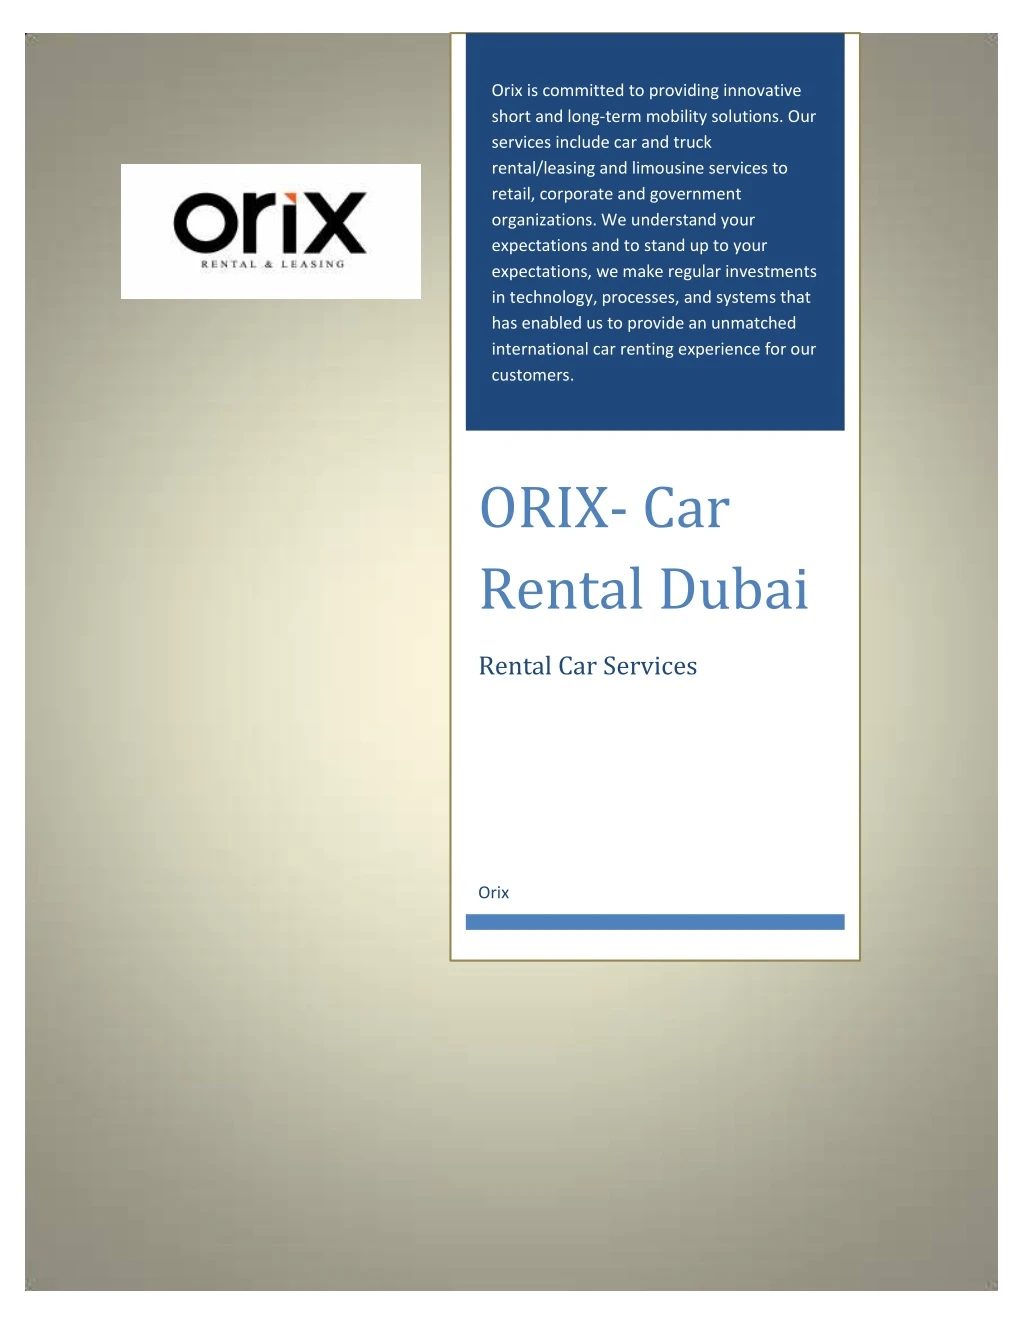 orix is committed to providing innovative short